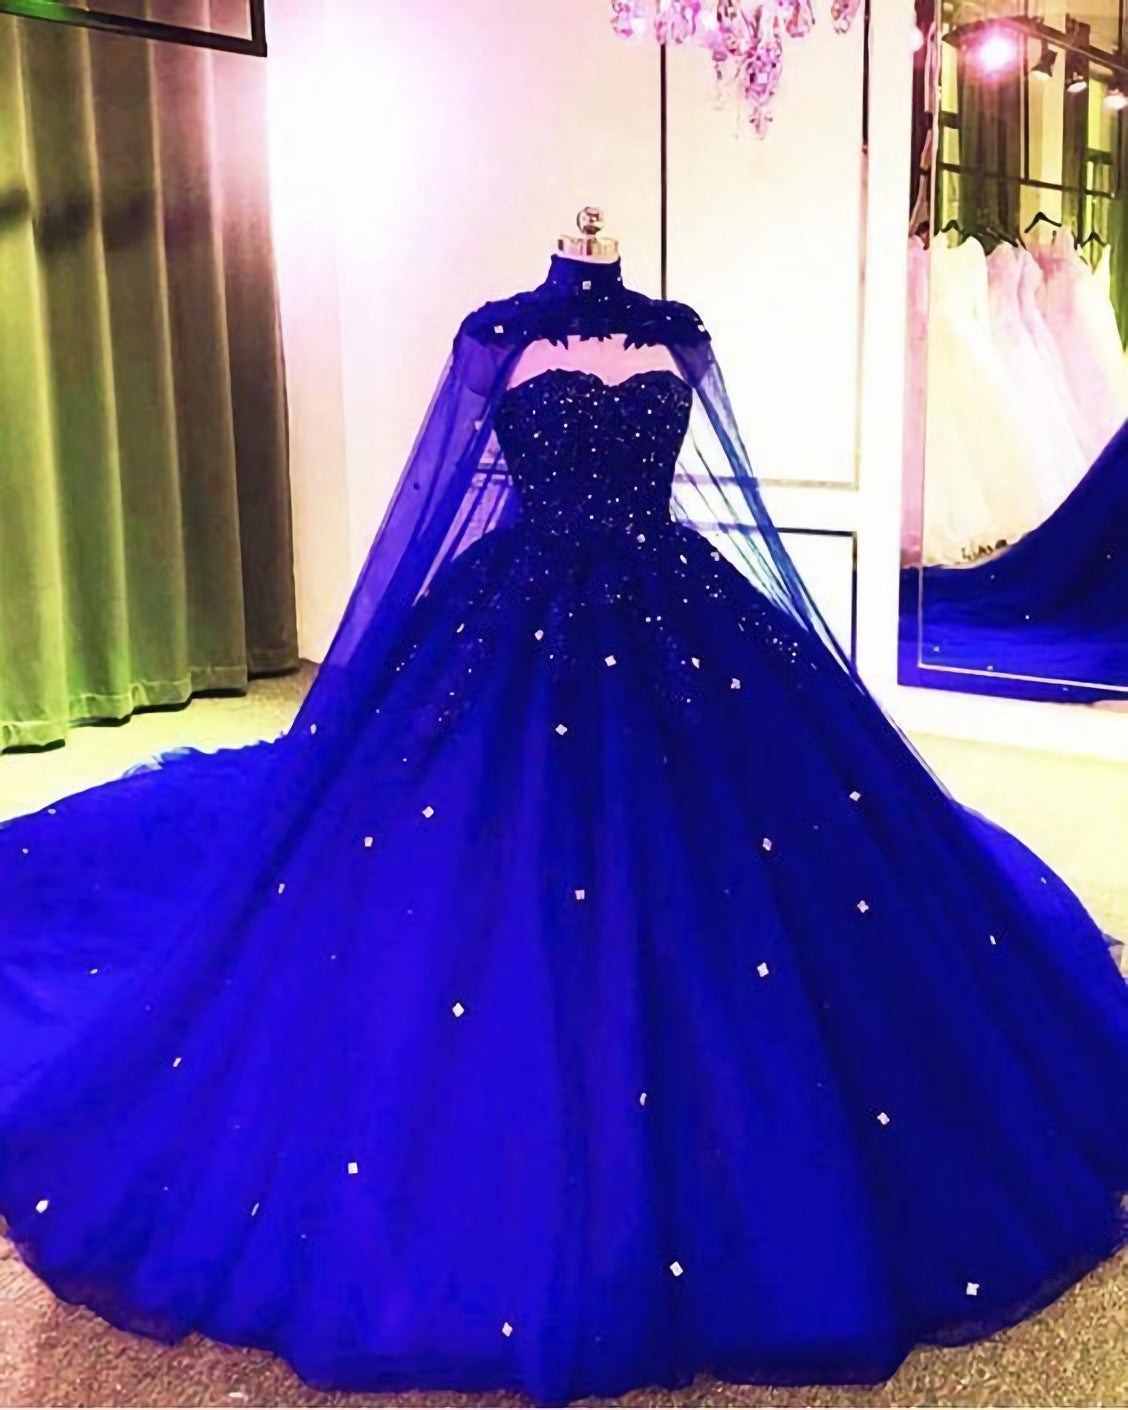 Black Dress Outfit, Royal Blue Tulle Ball Gown Prom Dress, With Cape